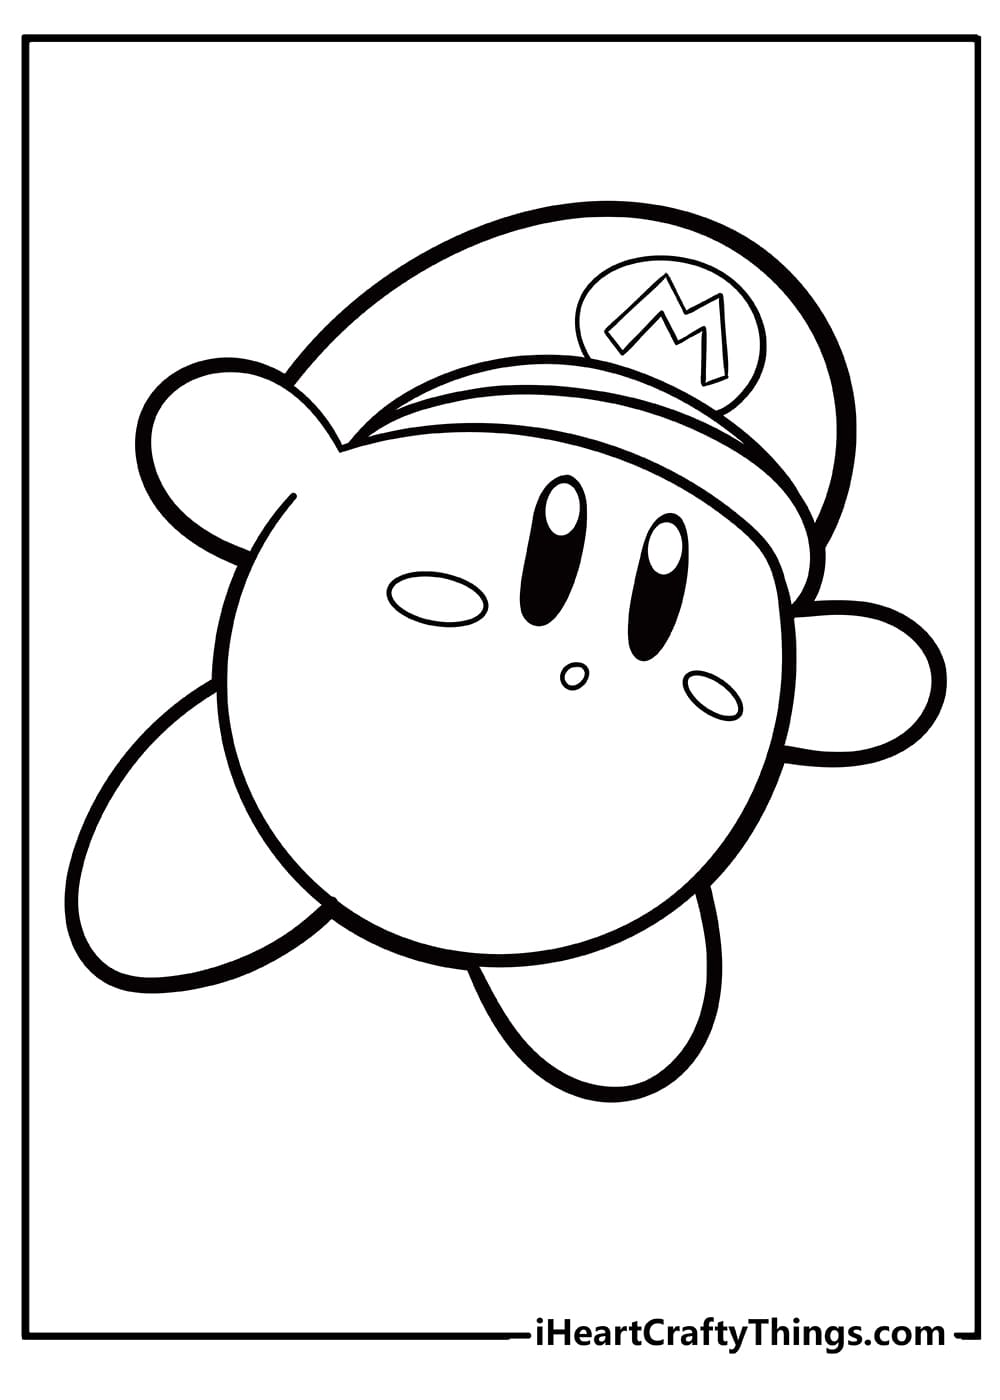 Kirby Cute Image For Kids Coloring Page